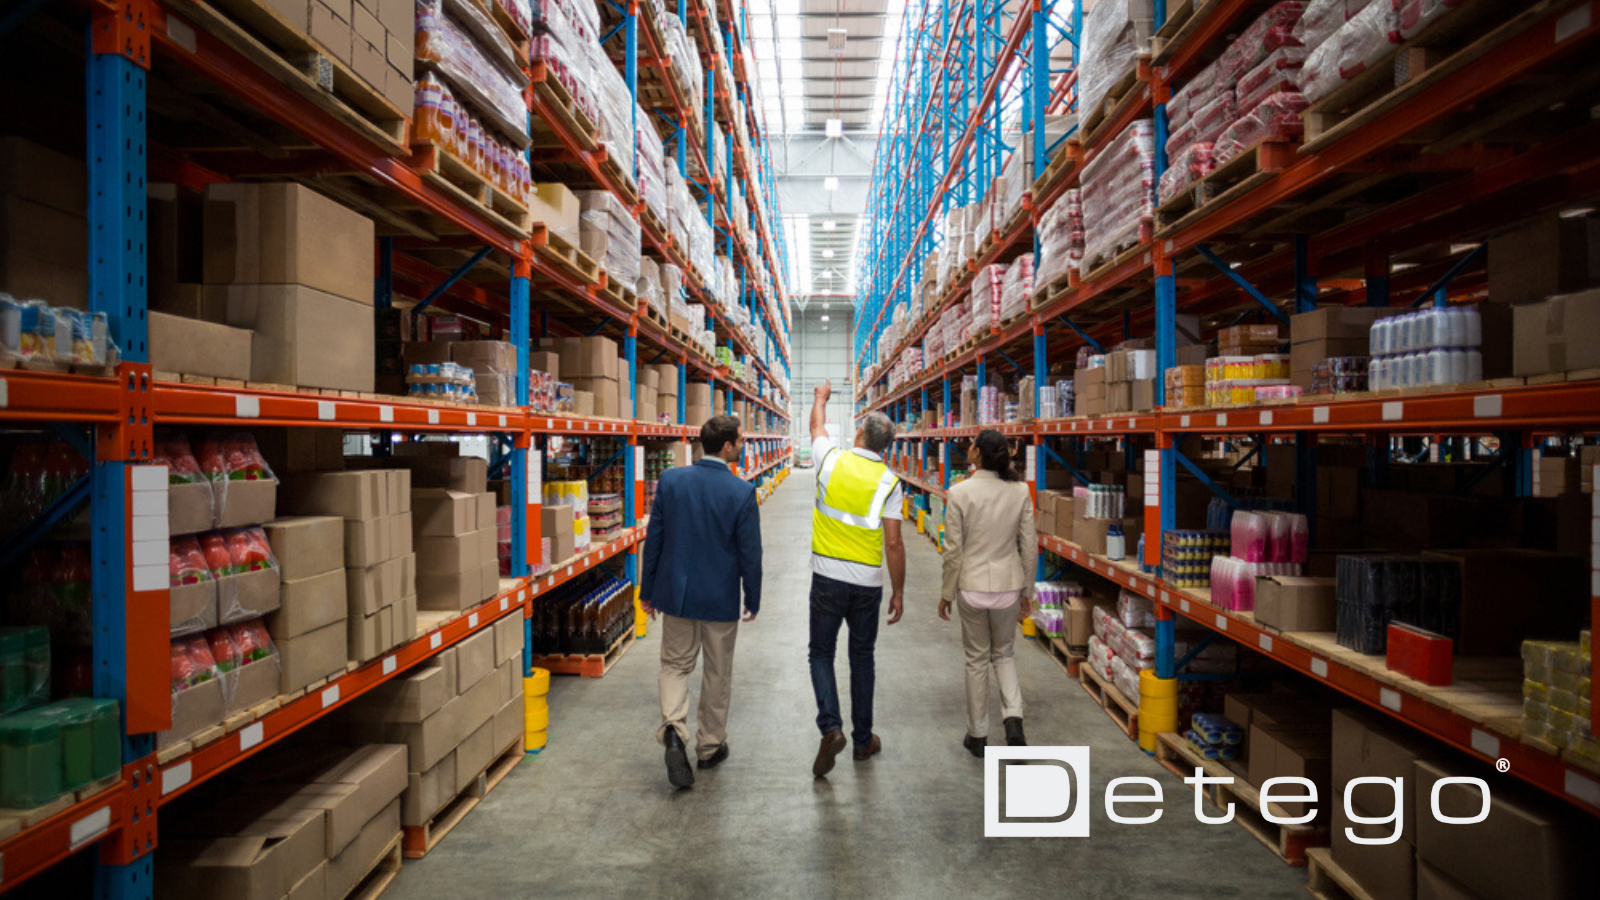 A worker in a yellow vest leads a businessman and a businesswoman in suits between tall shelves in a warehouse